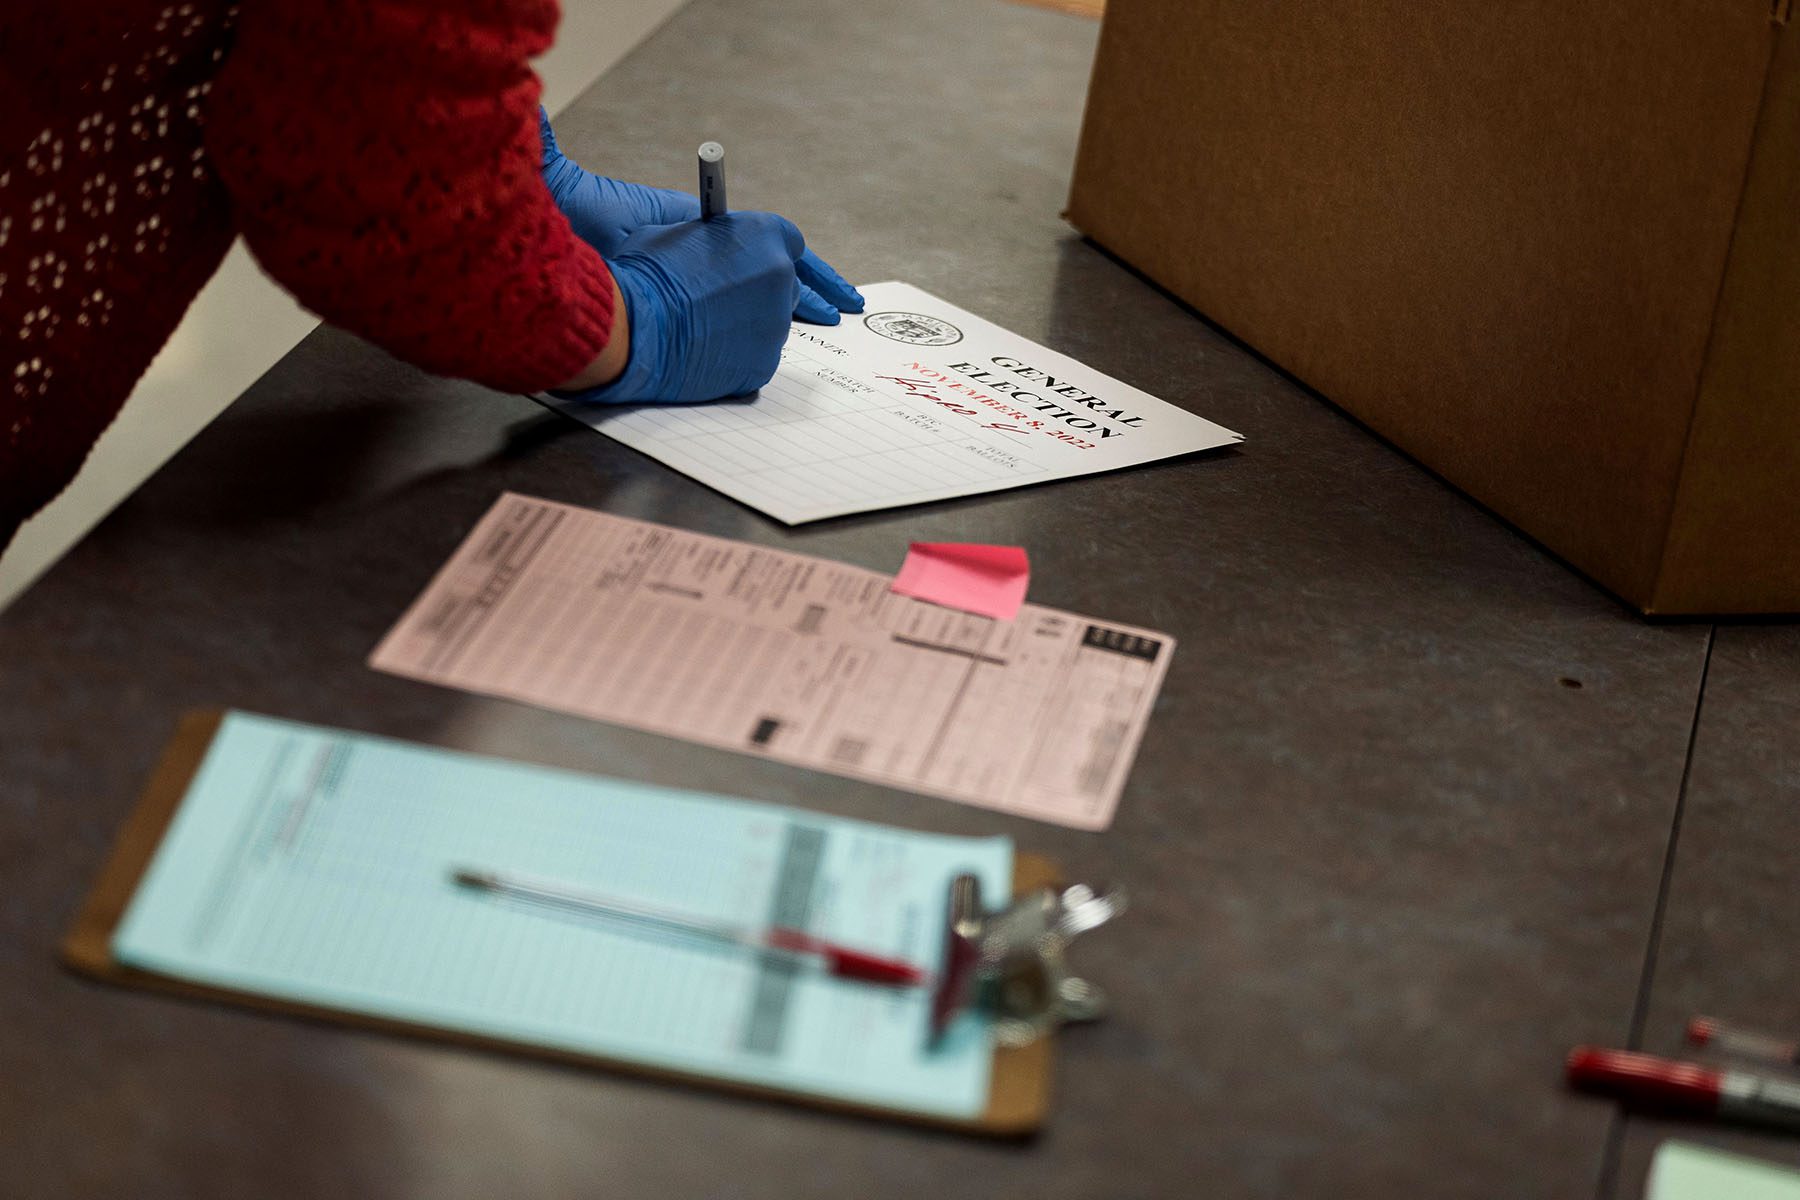 A poll worker handles ballots for the midterm election.